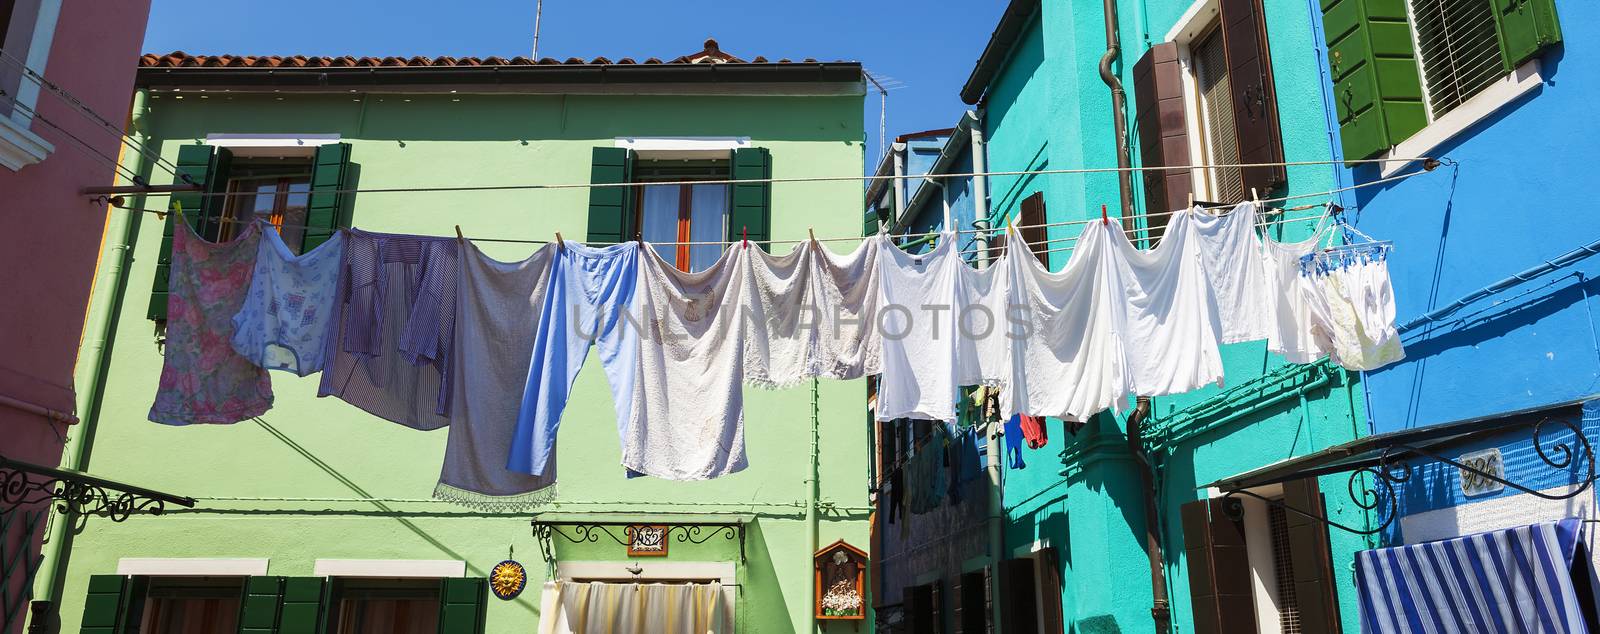 clothes drying in back yard in Burano. by vwalakte